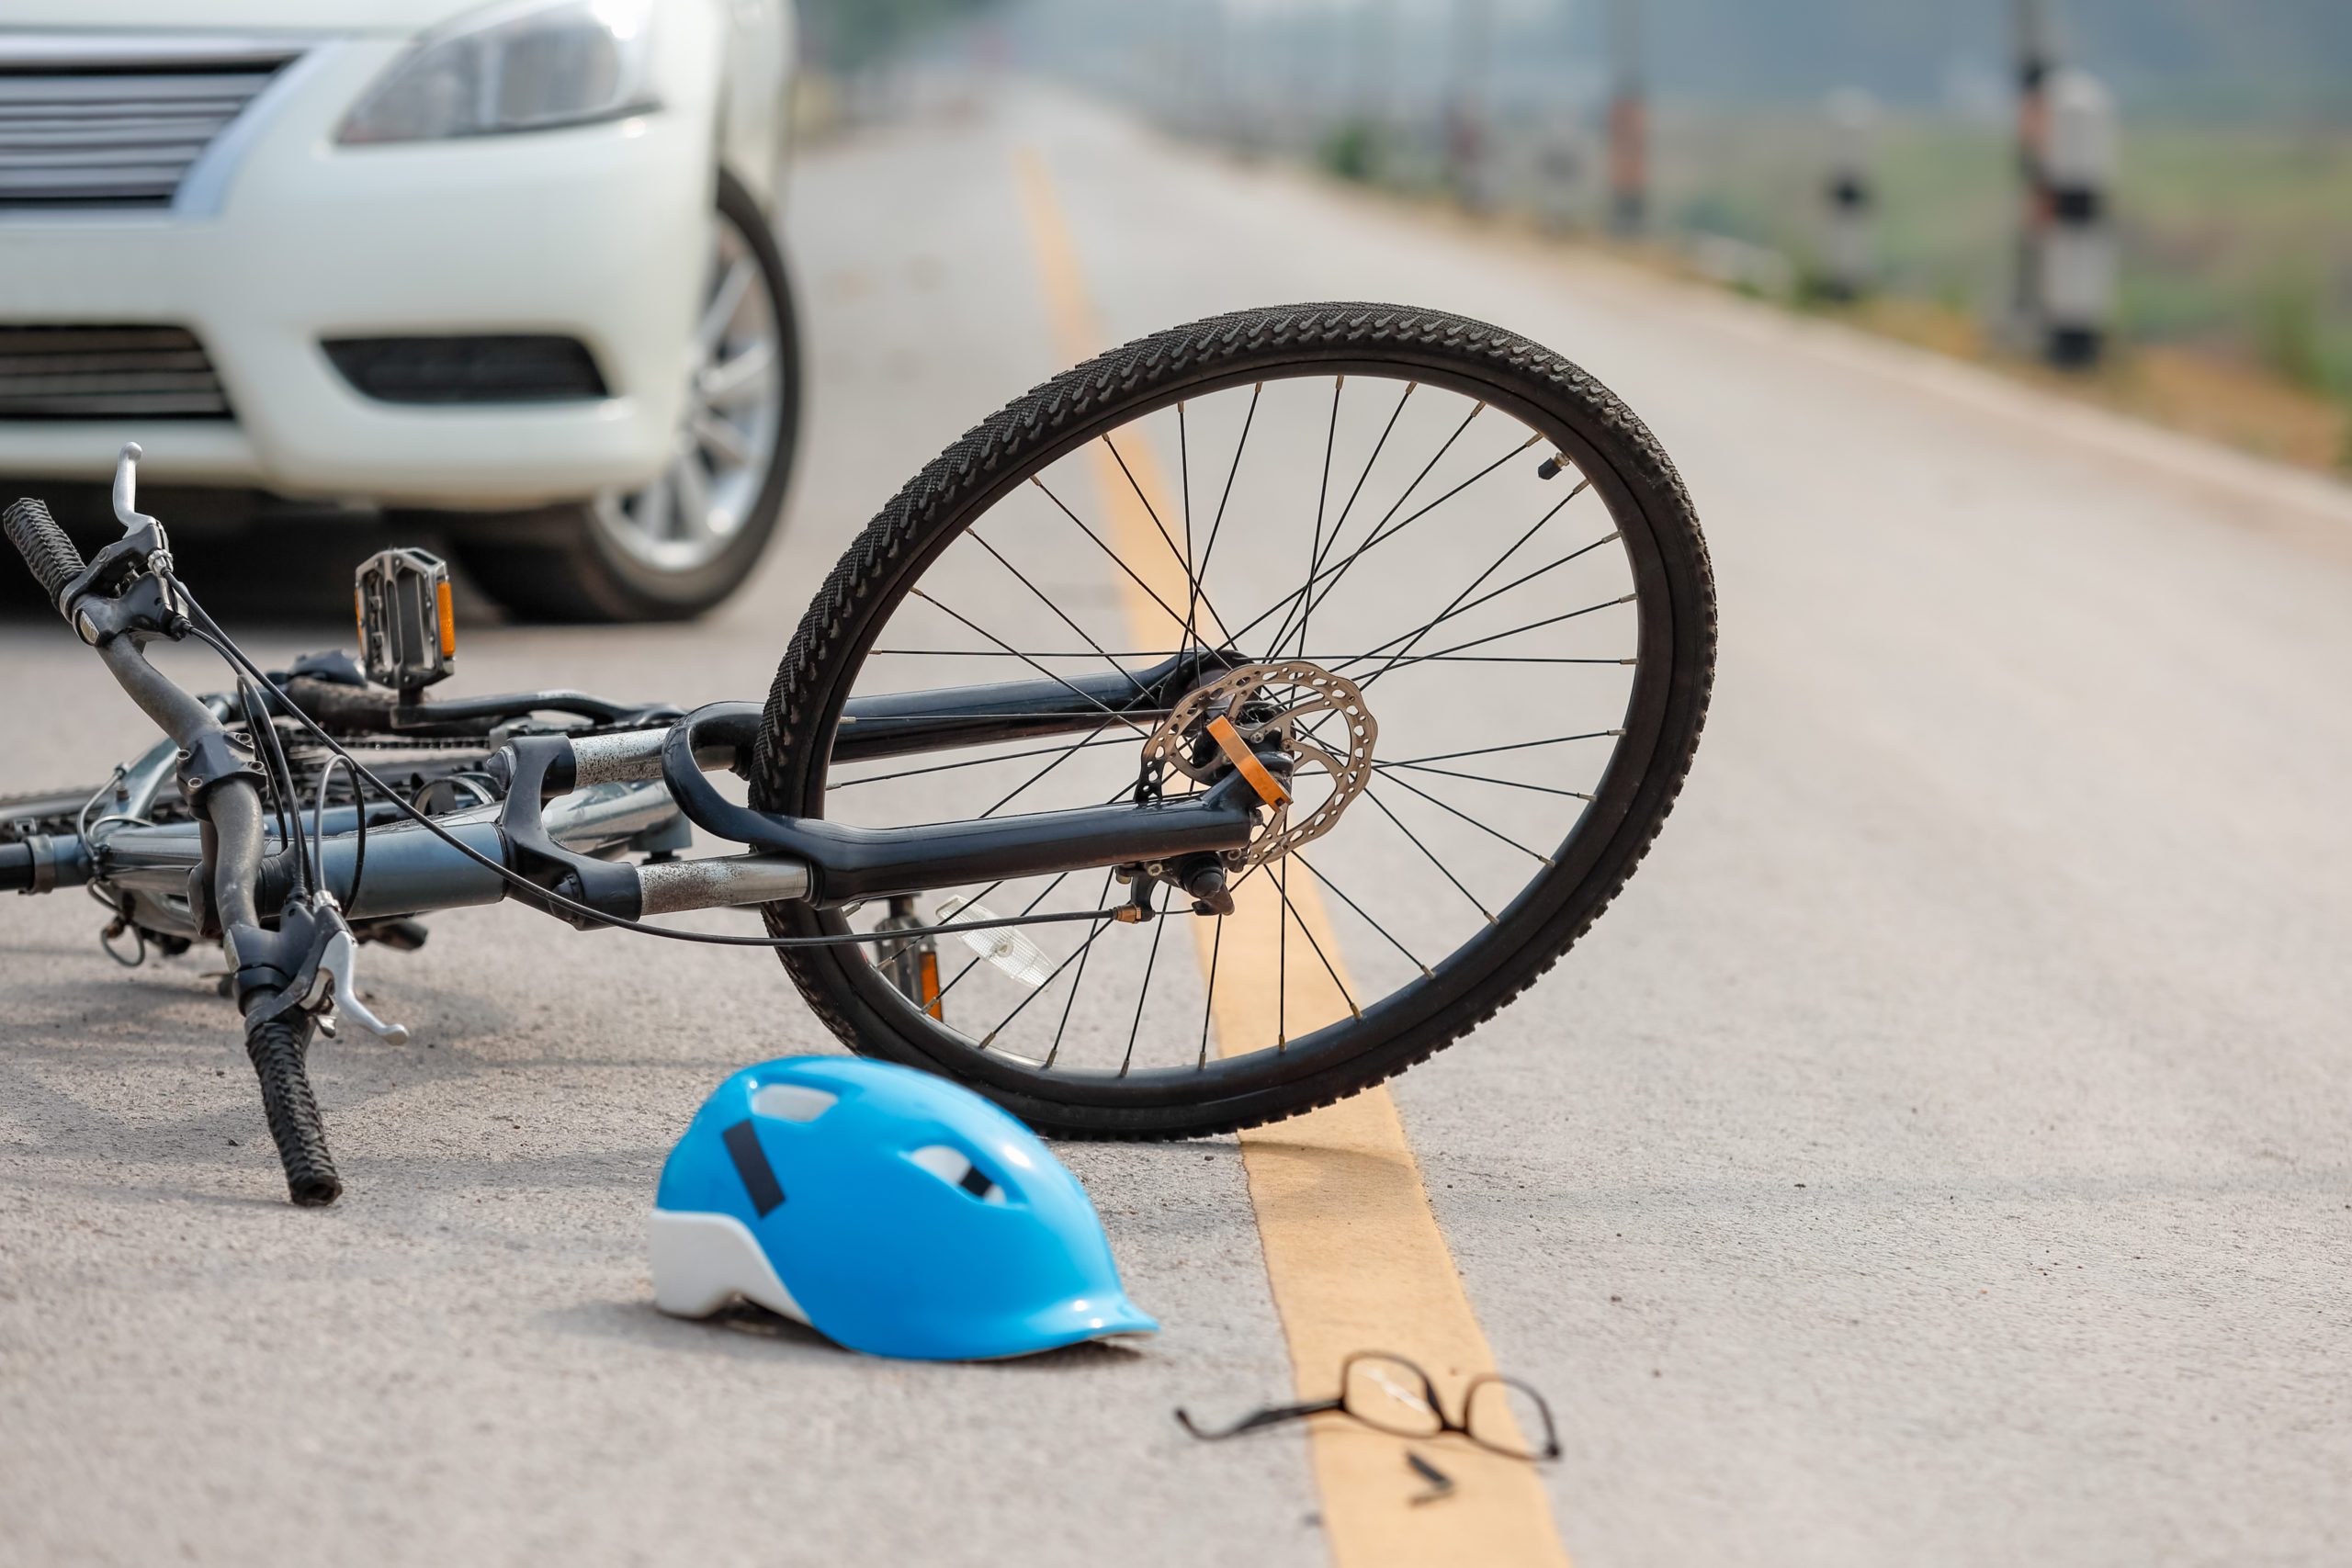 How To File an Injury Claim After a Bicycle Accident